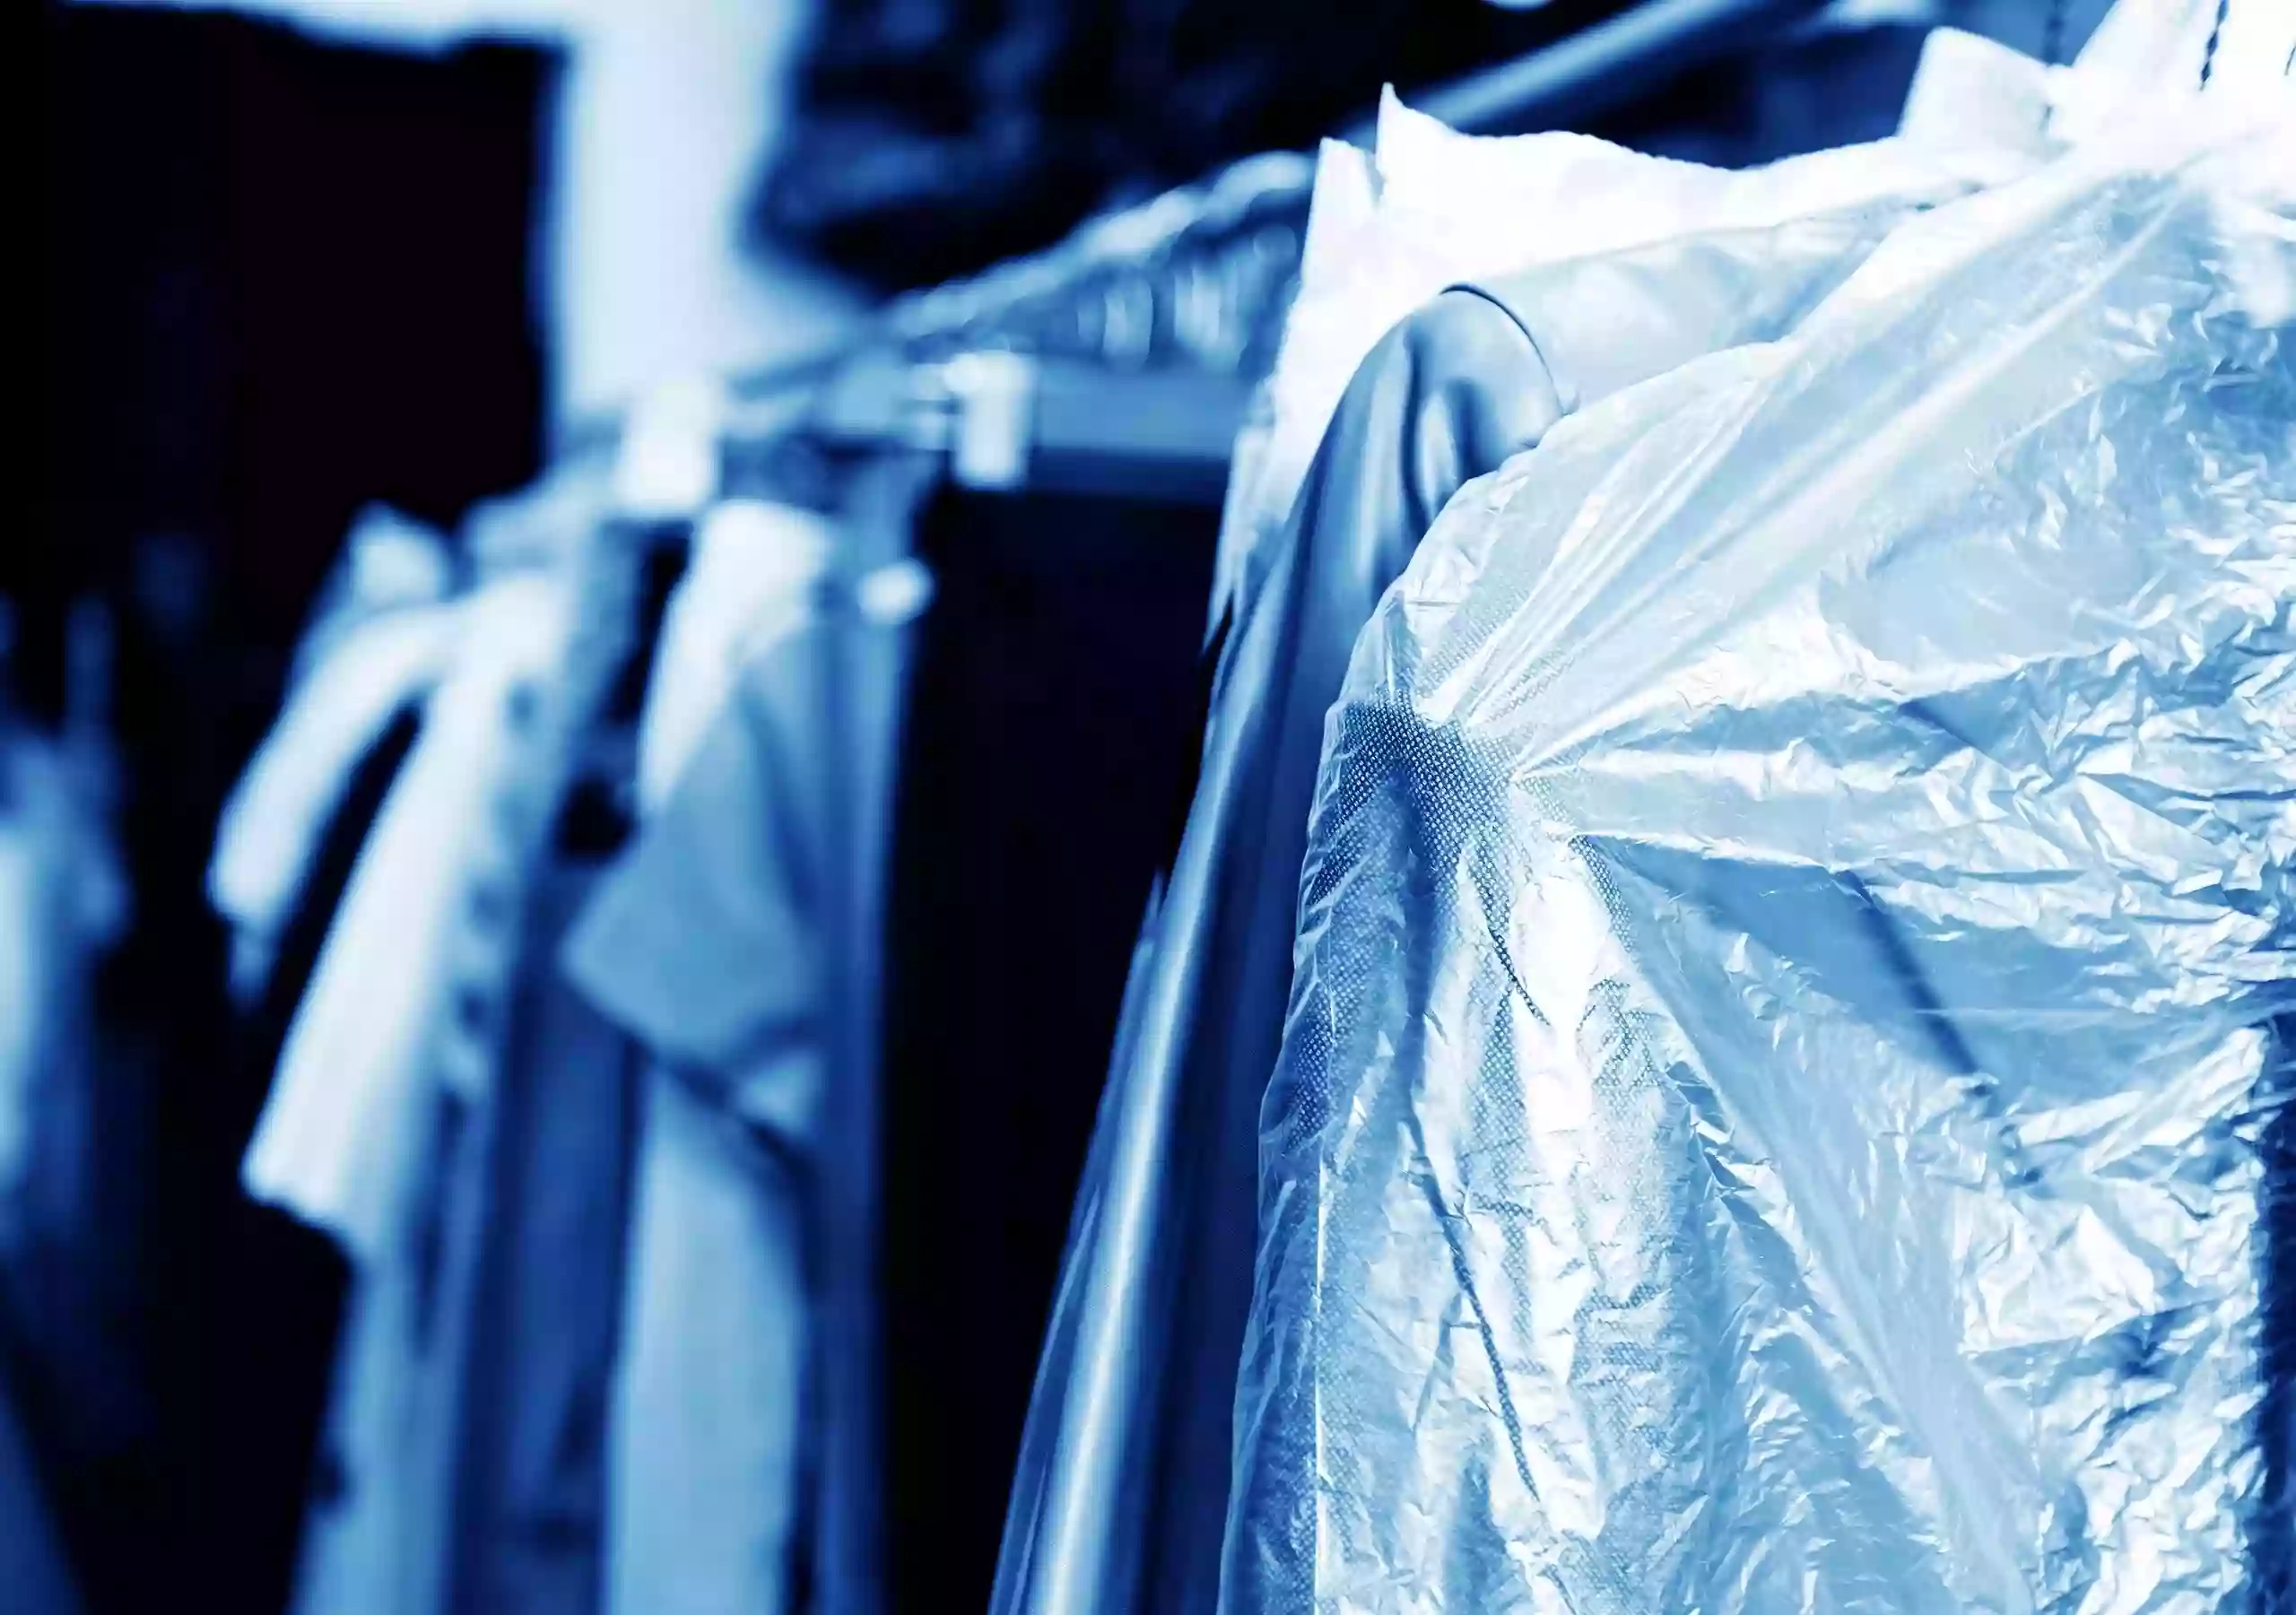 Parker's Professional Dry Cleaning